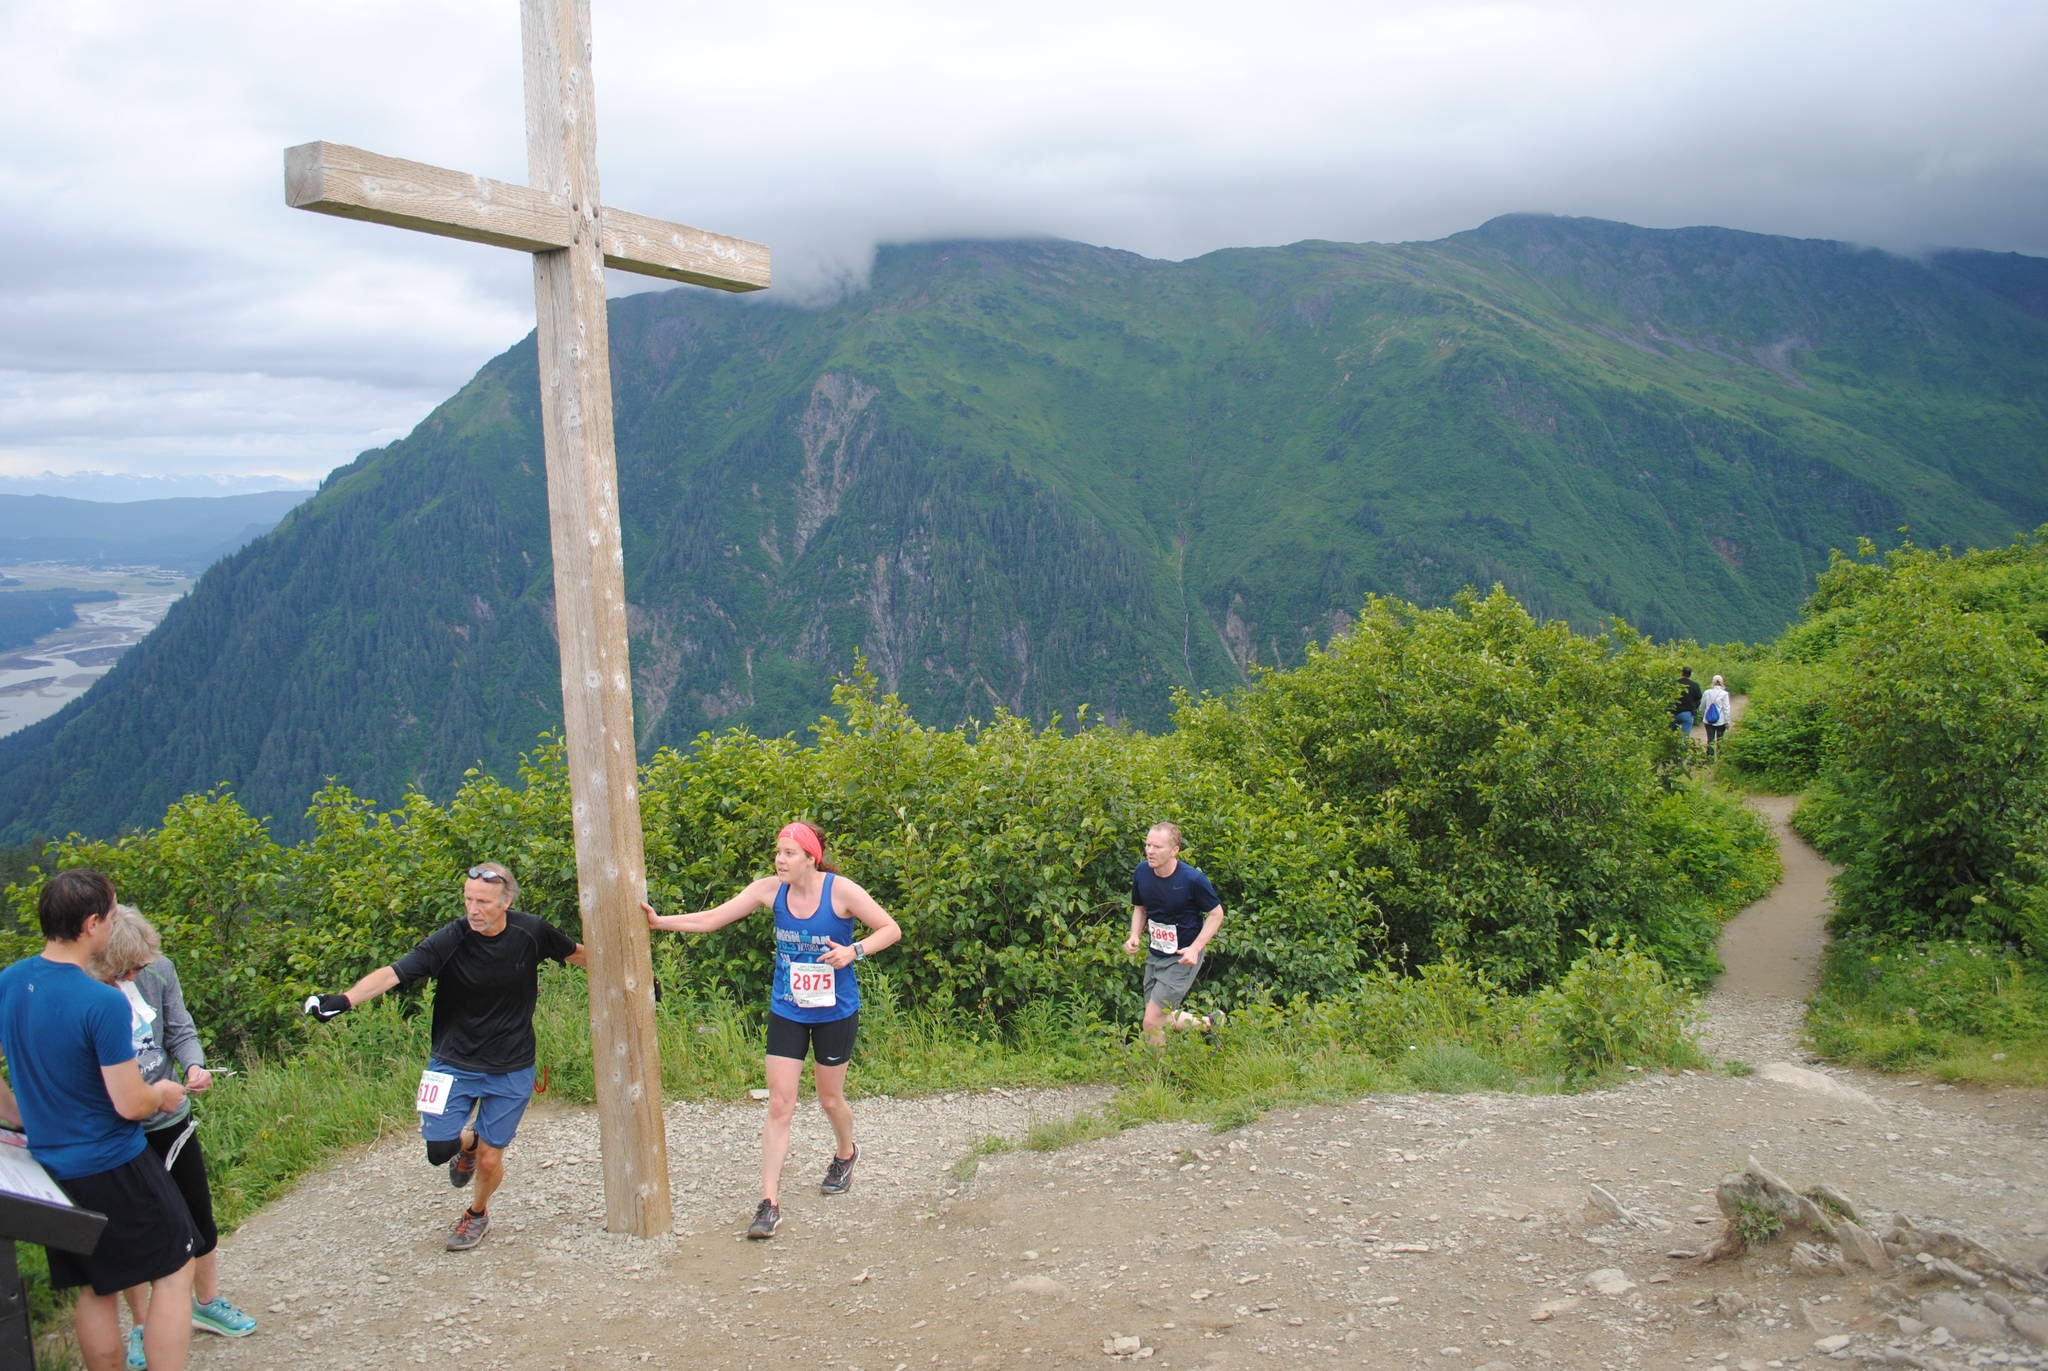 Runners touch the Father Brown’s cross, which served as the finish line at the Mt. Roberts Tram race on Saturday morning. (Photo courtesy Darla Orbistondo)